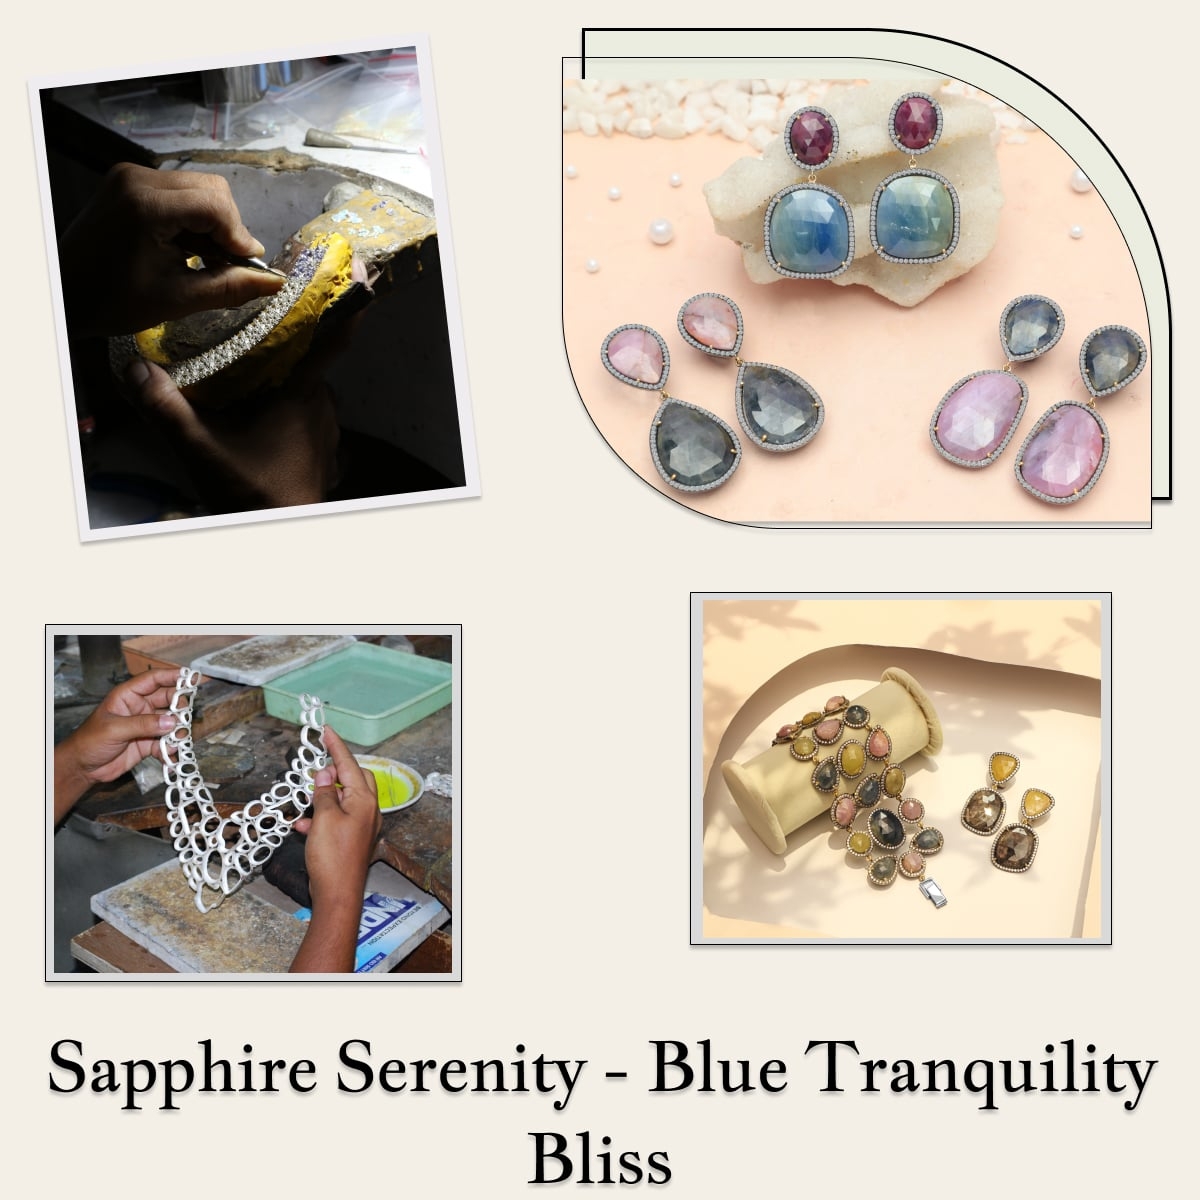 Sapphire Blues for Tranquillity